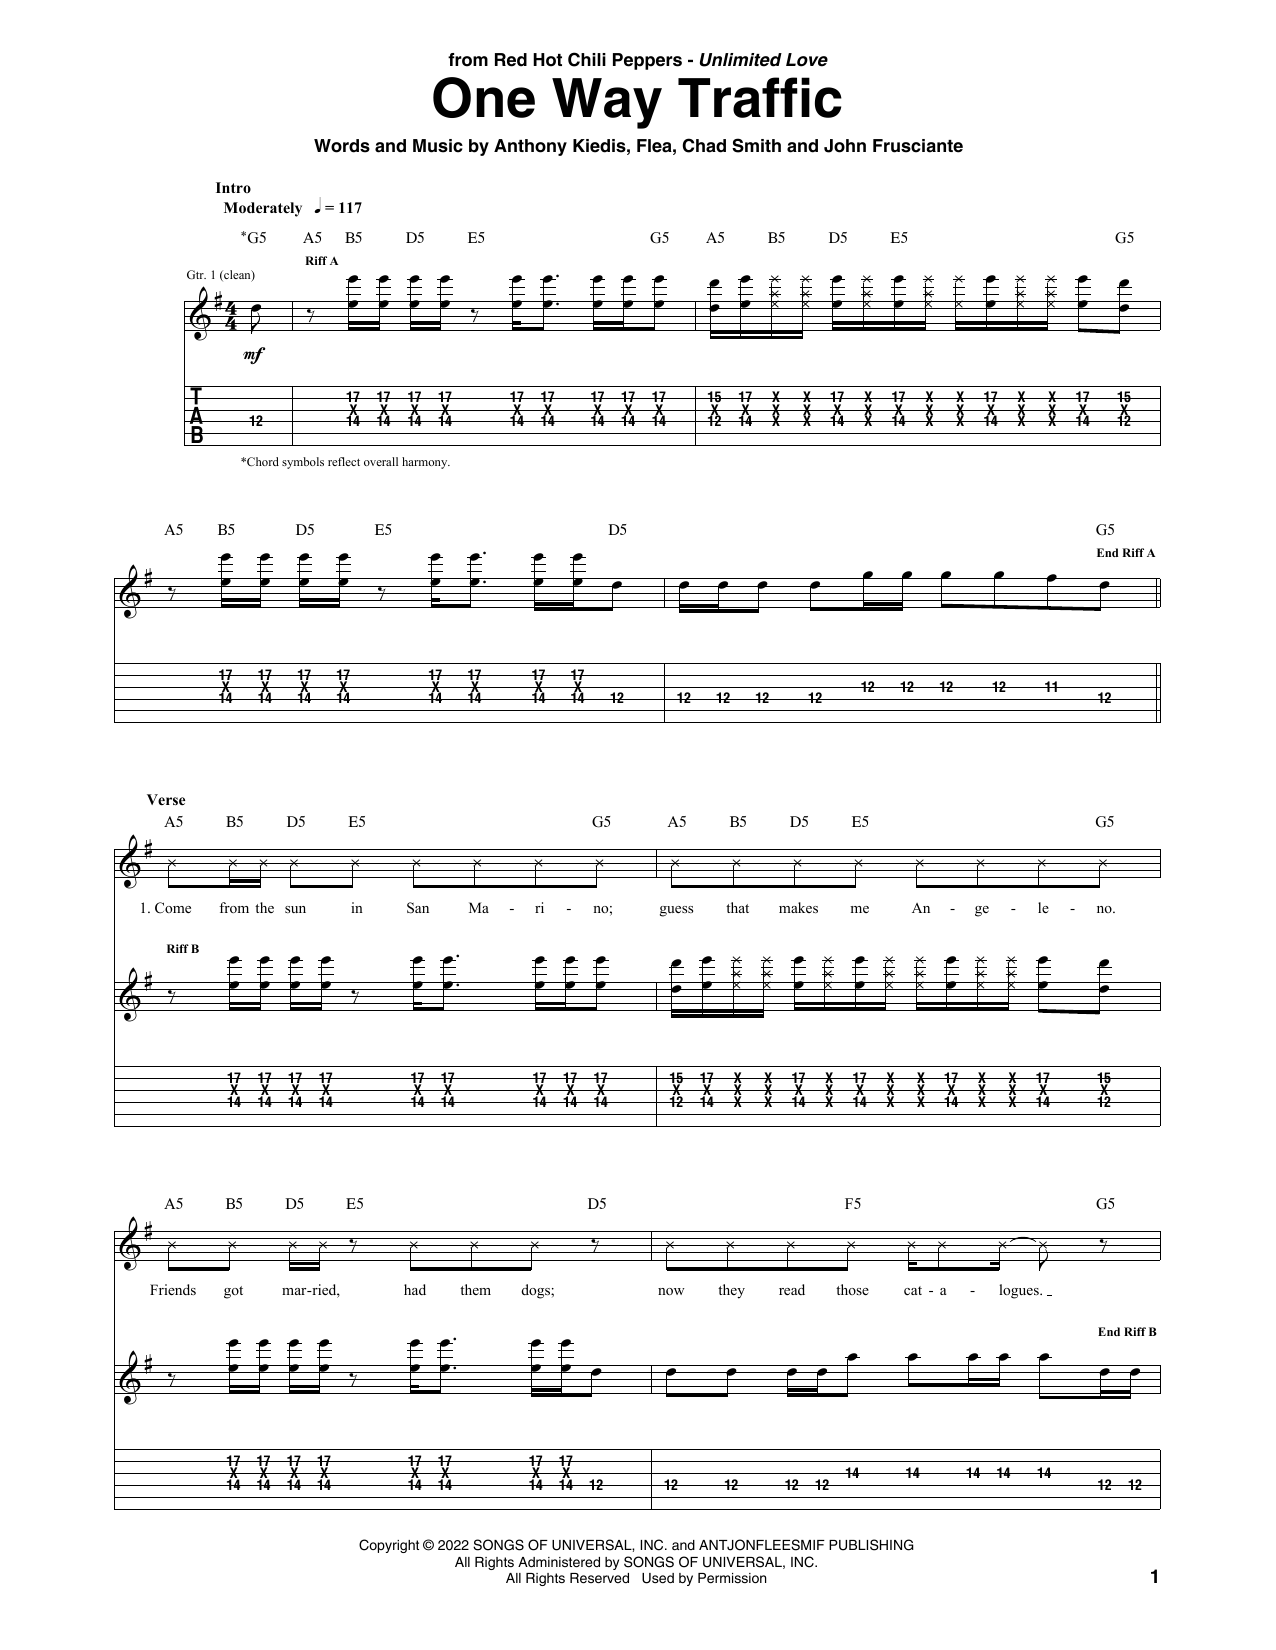 Download Red Hot Chili Peppers One Way Traffic Sheet Music